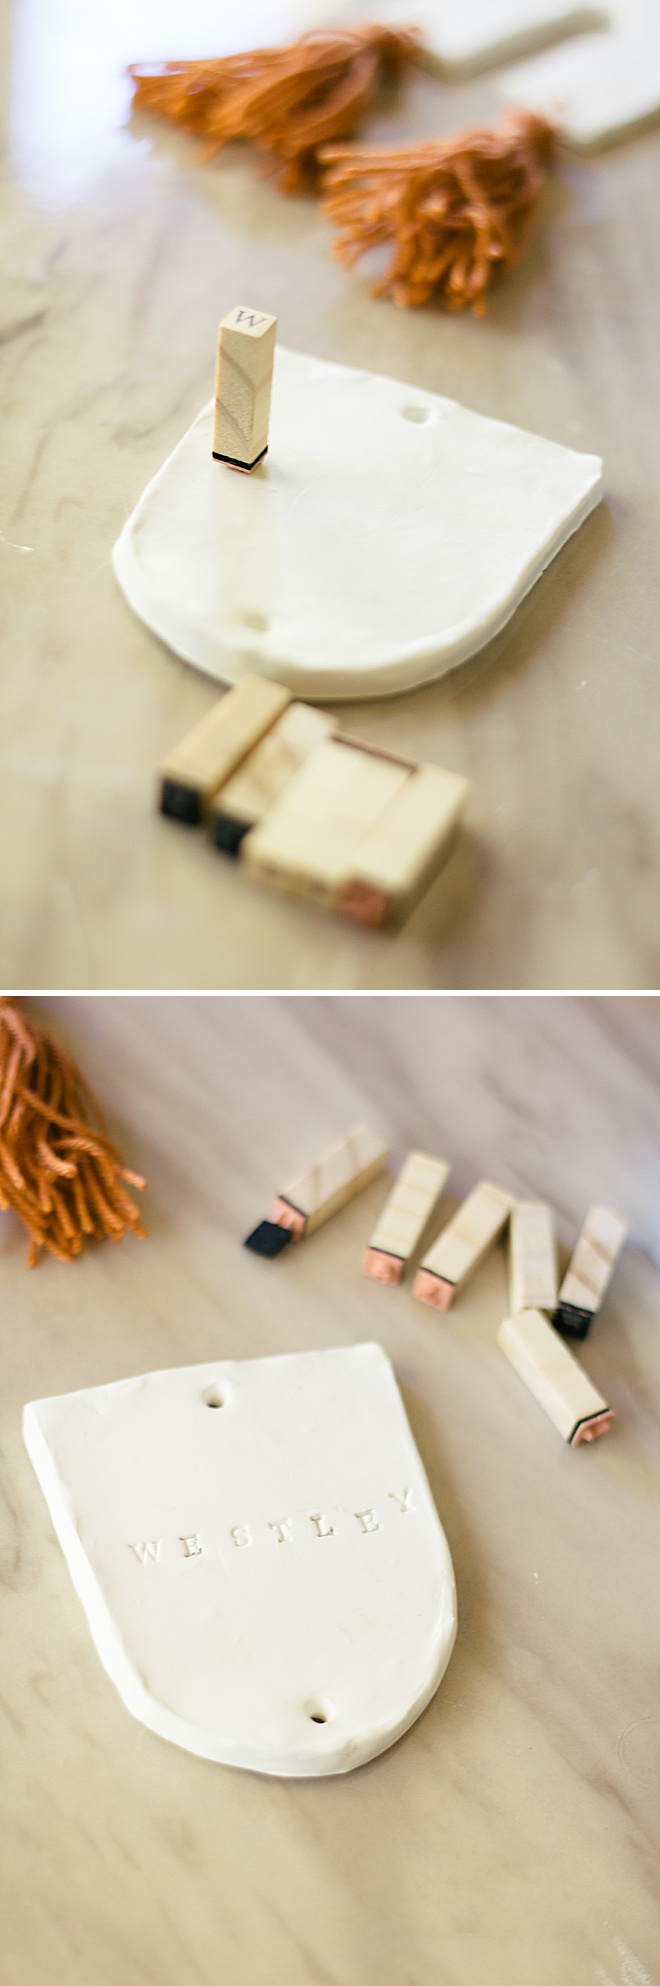 DIY clay custom ornament to decorate your house all year long.